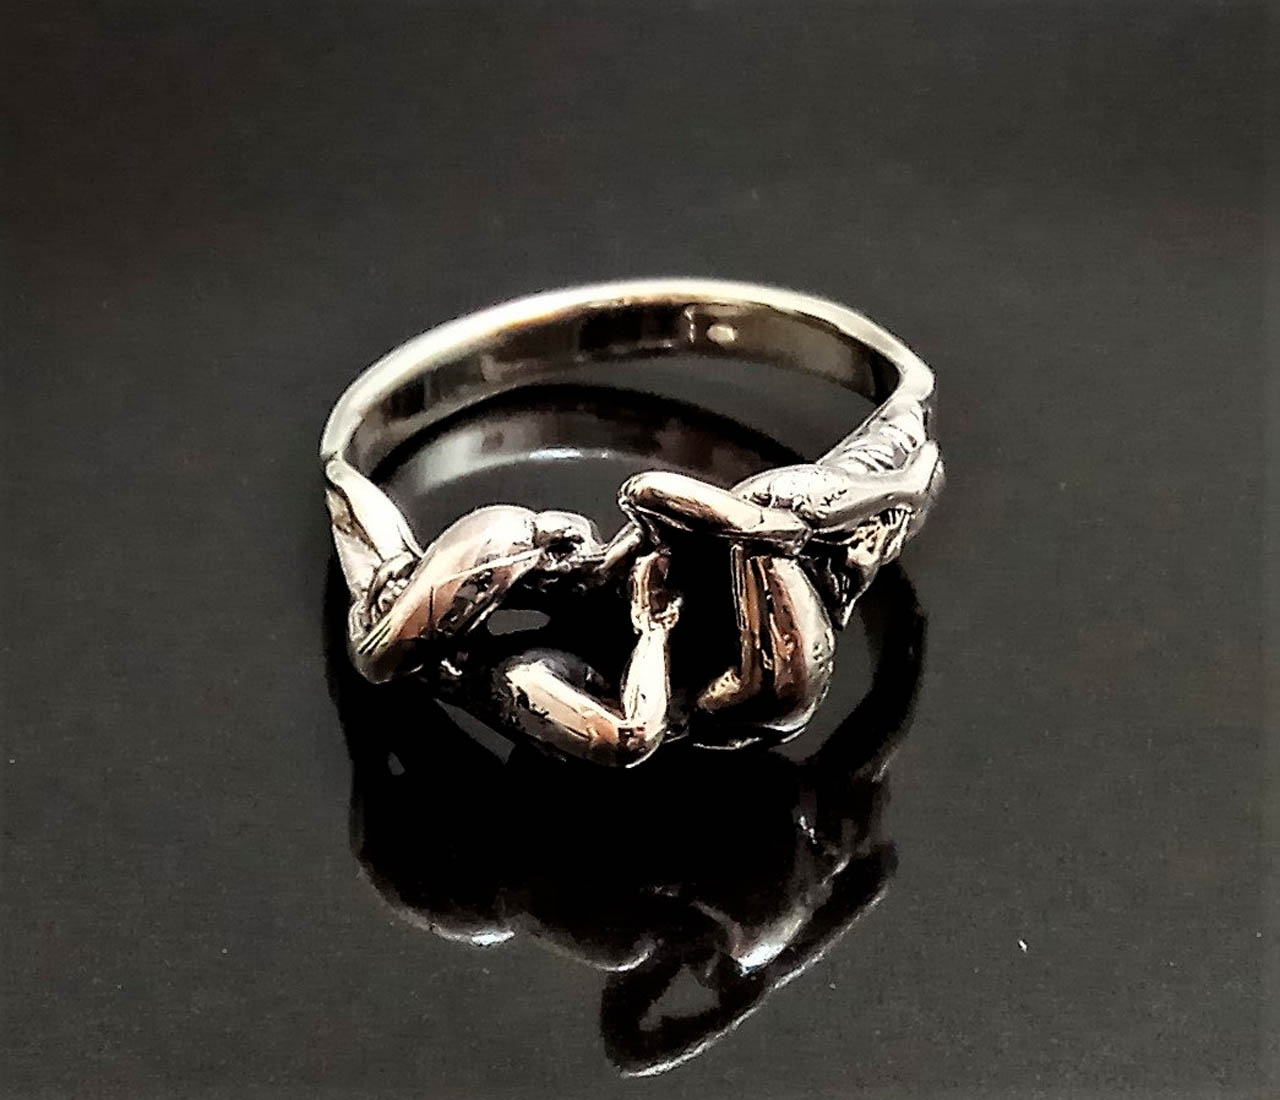 Sterling Silver 925 Erotic Ring Kama Sutra Pose 69 Sexy Ring Sex Love